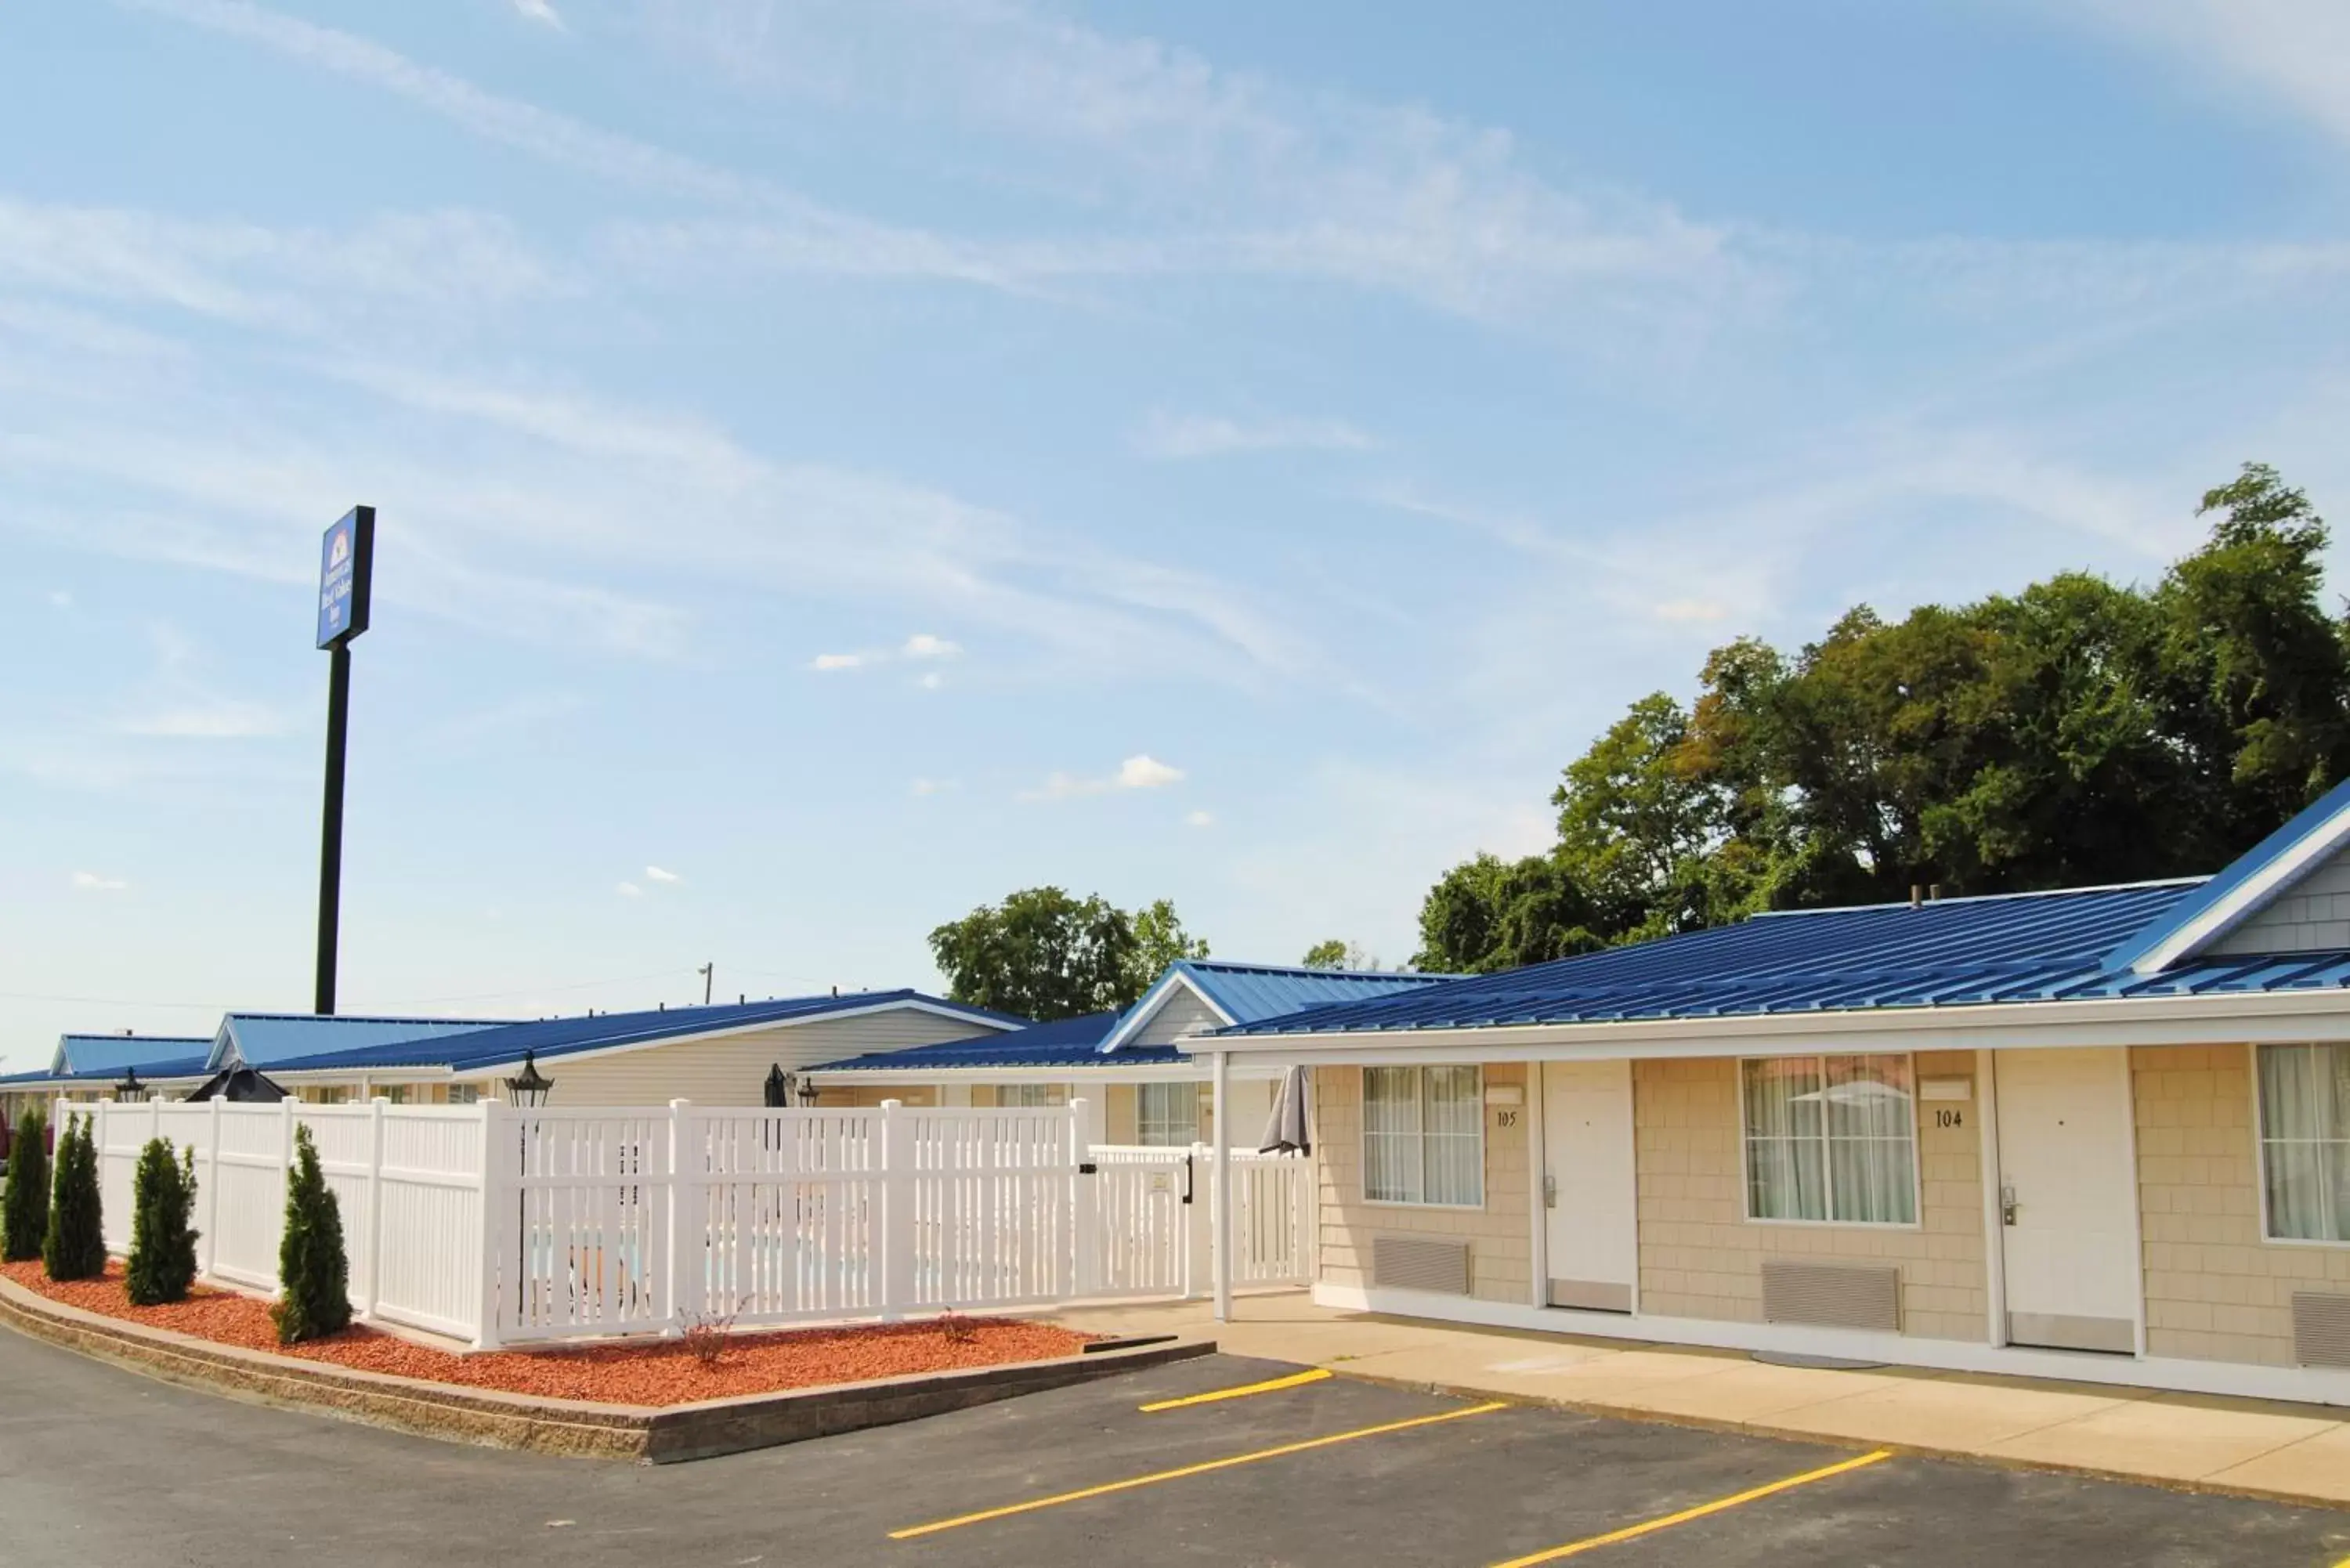 Area and facilities in Americas Best Value Inn-Saint Clairsville/Wheeling